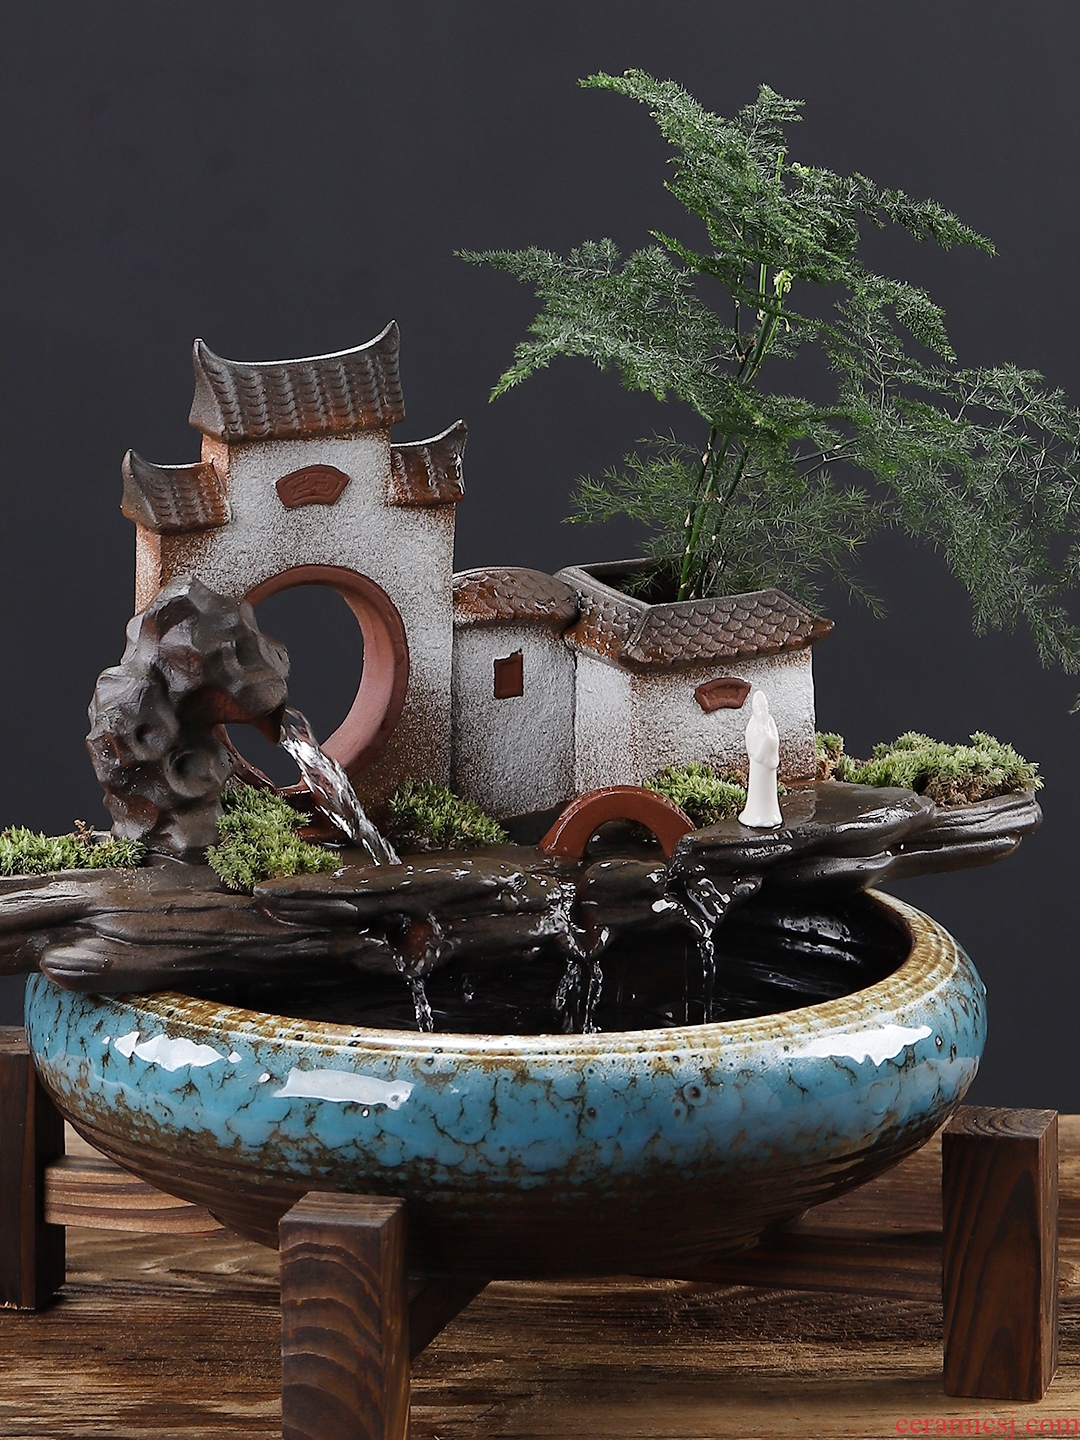 Oriental clay ceramic feng shui plutus furnishing articles household indoor TV ark sitting room aquarium water humidification ornaments